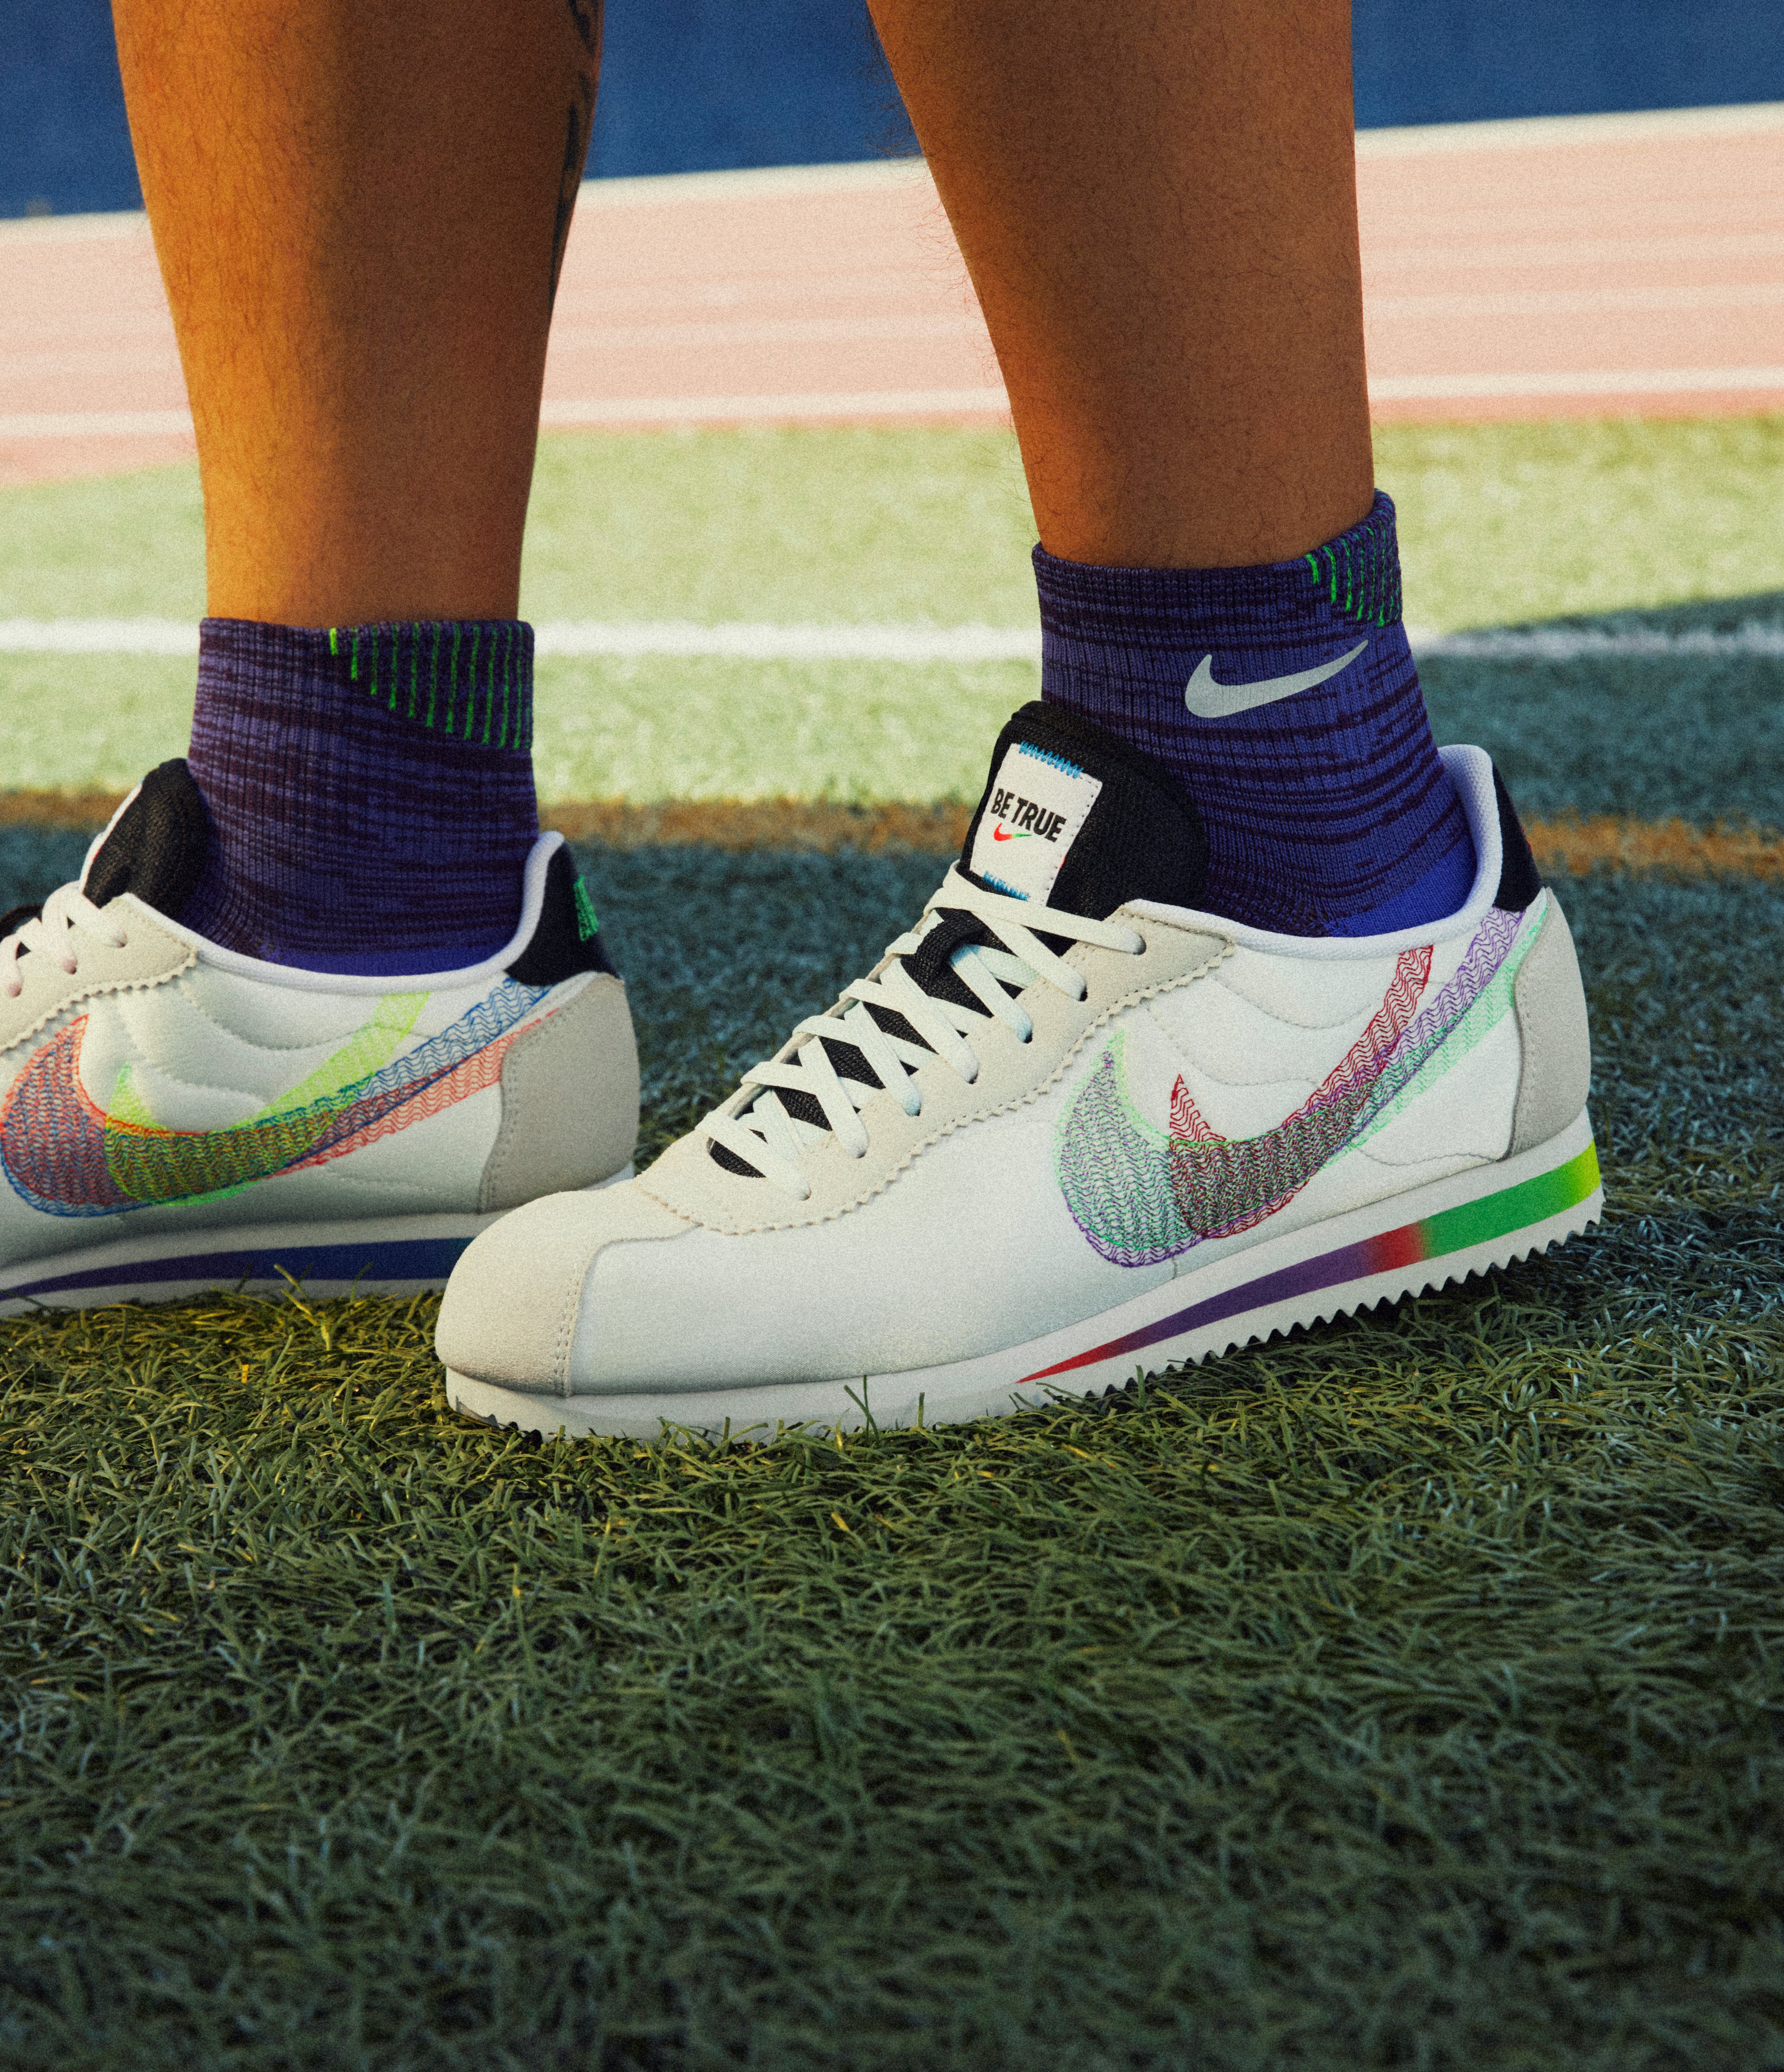 Nike's 'Be True' sneakers go beyond your typical Pride designs